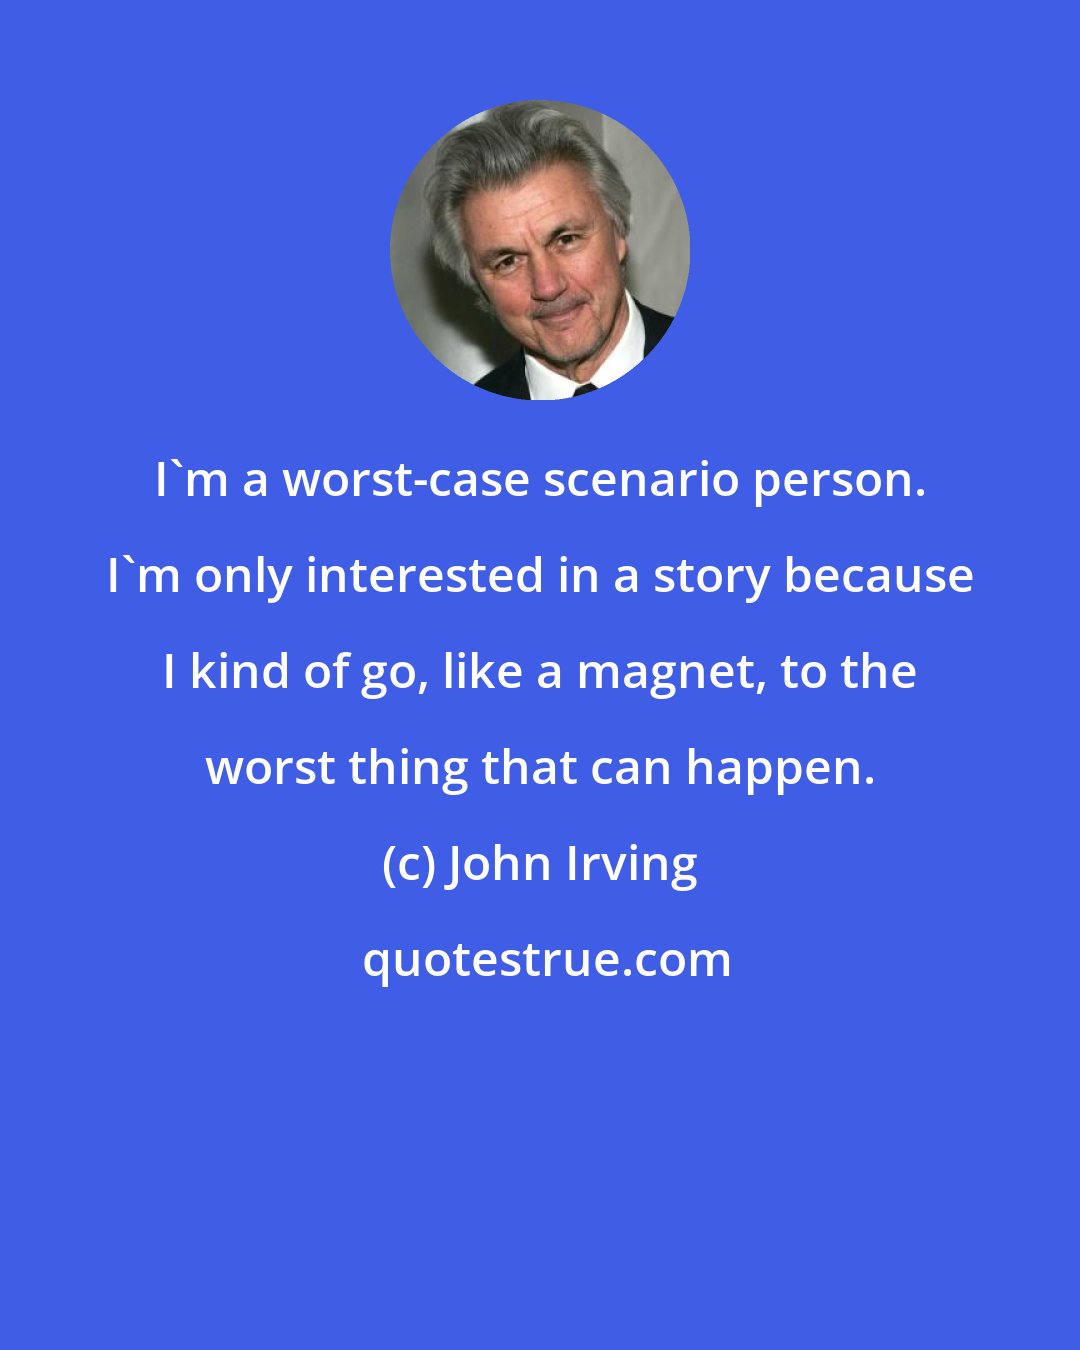 John Irving: I'm a worst-case scenario person. I'm only interested in a story because I kind of go, like a magnet, to the worst thing that can happen.